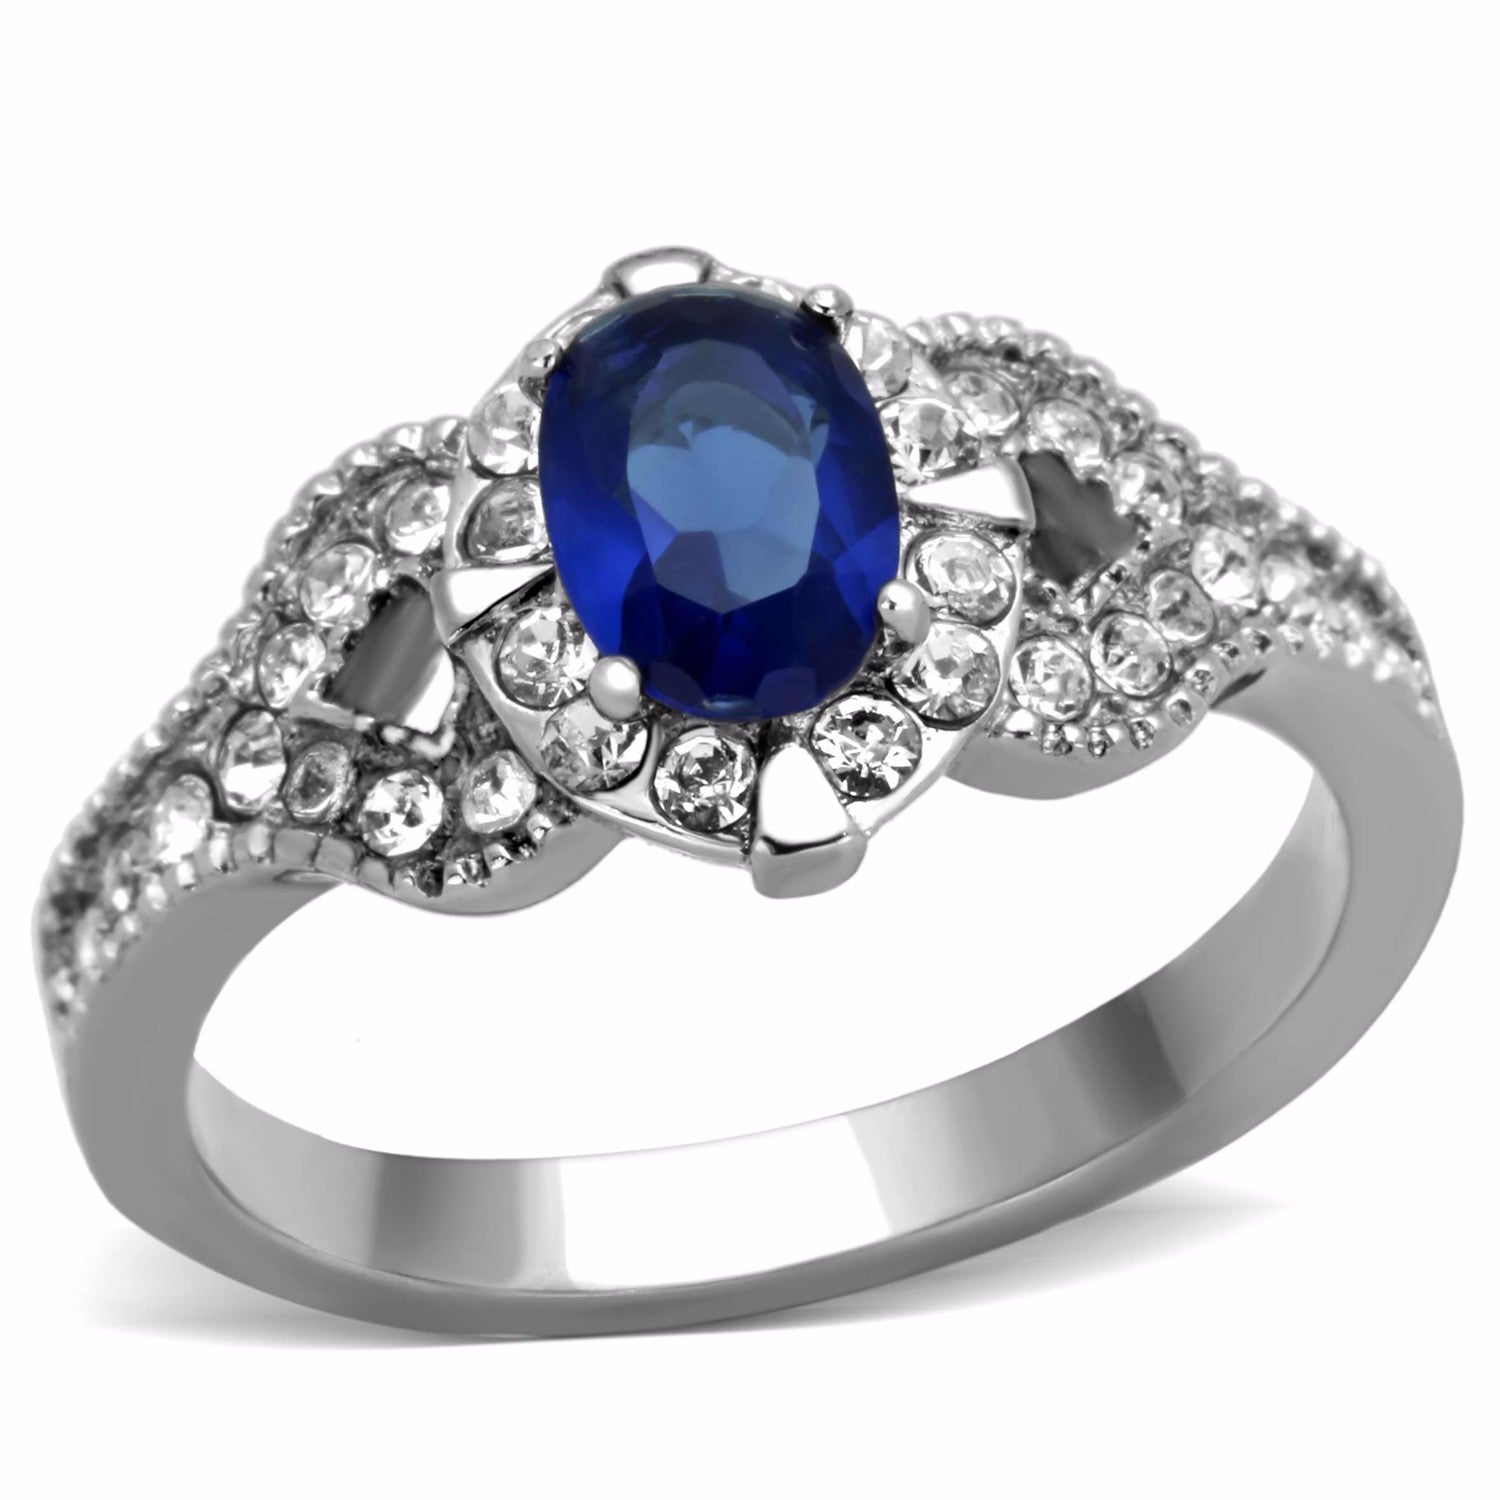 Women's 7x5mm Montana Blue Oval Cut CZ Center Stainless Steel Cocktail Ring - LA NY Jewelry